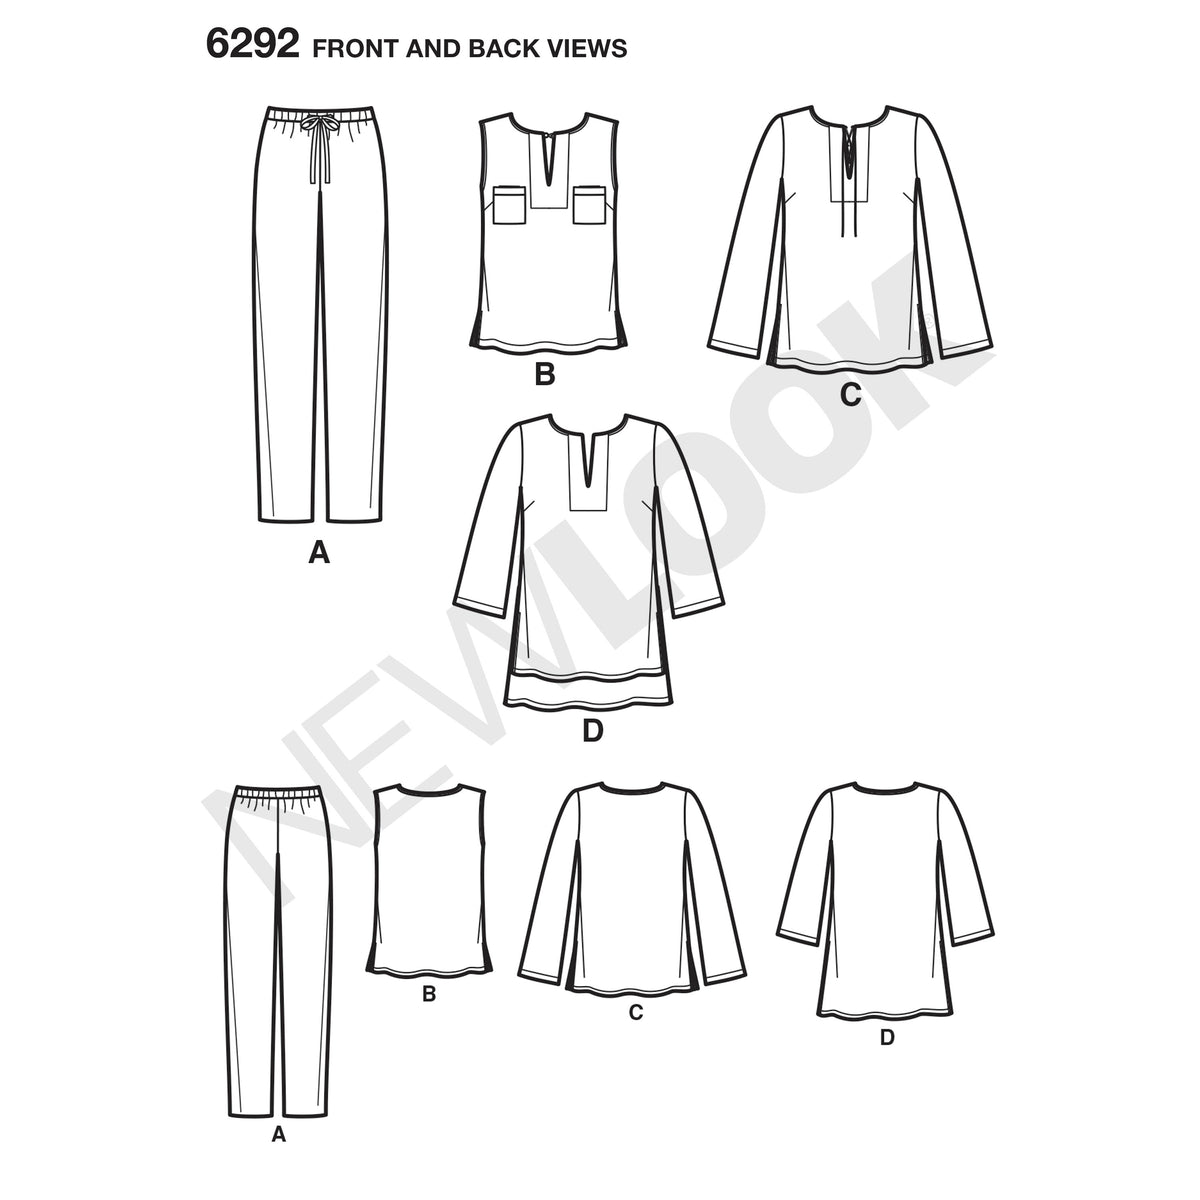 6292 Misses' Tunic or Top and Pull-on Pants